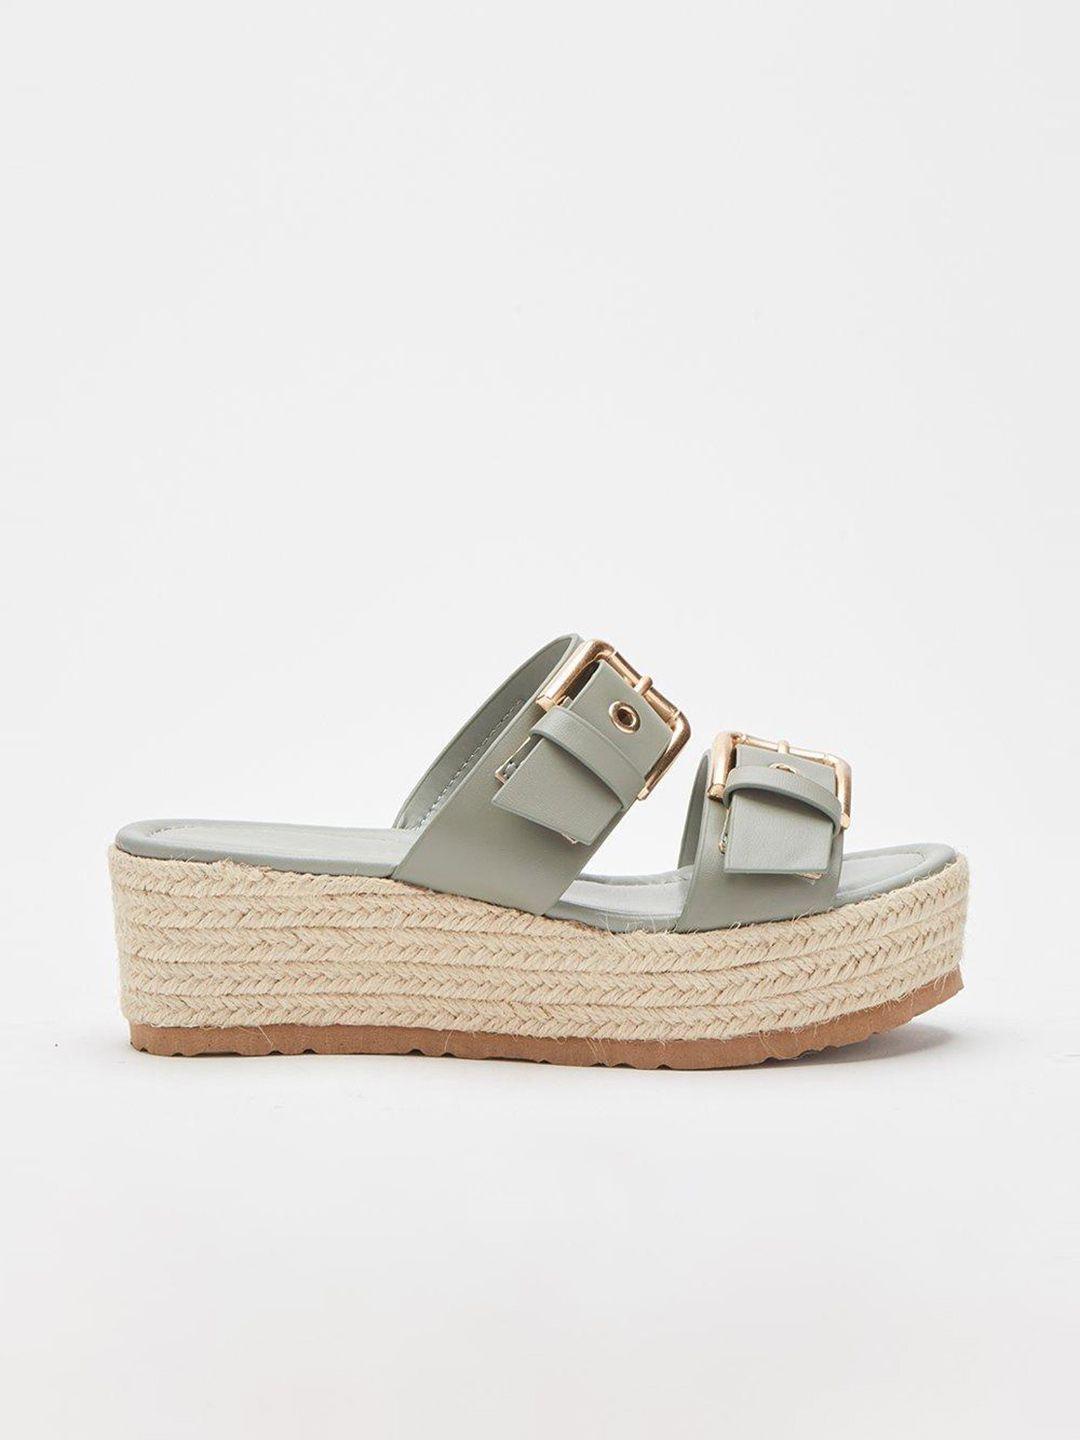 dorothy perkins sage green solid wedges with buckle detail